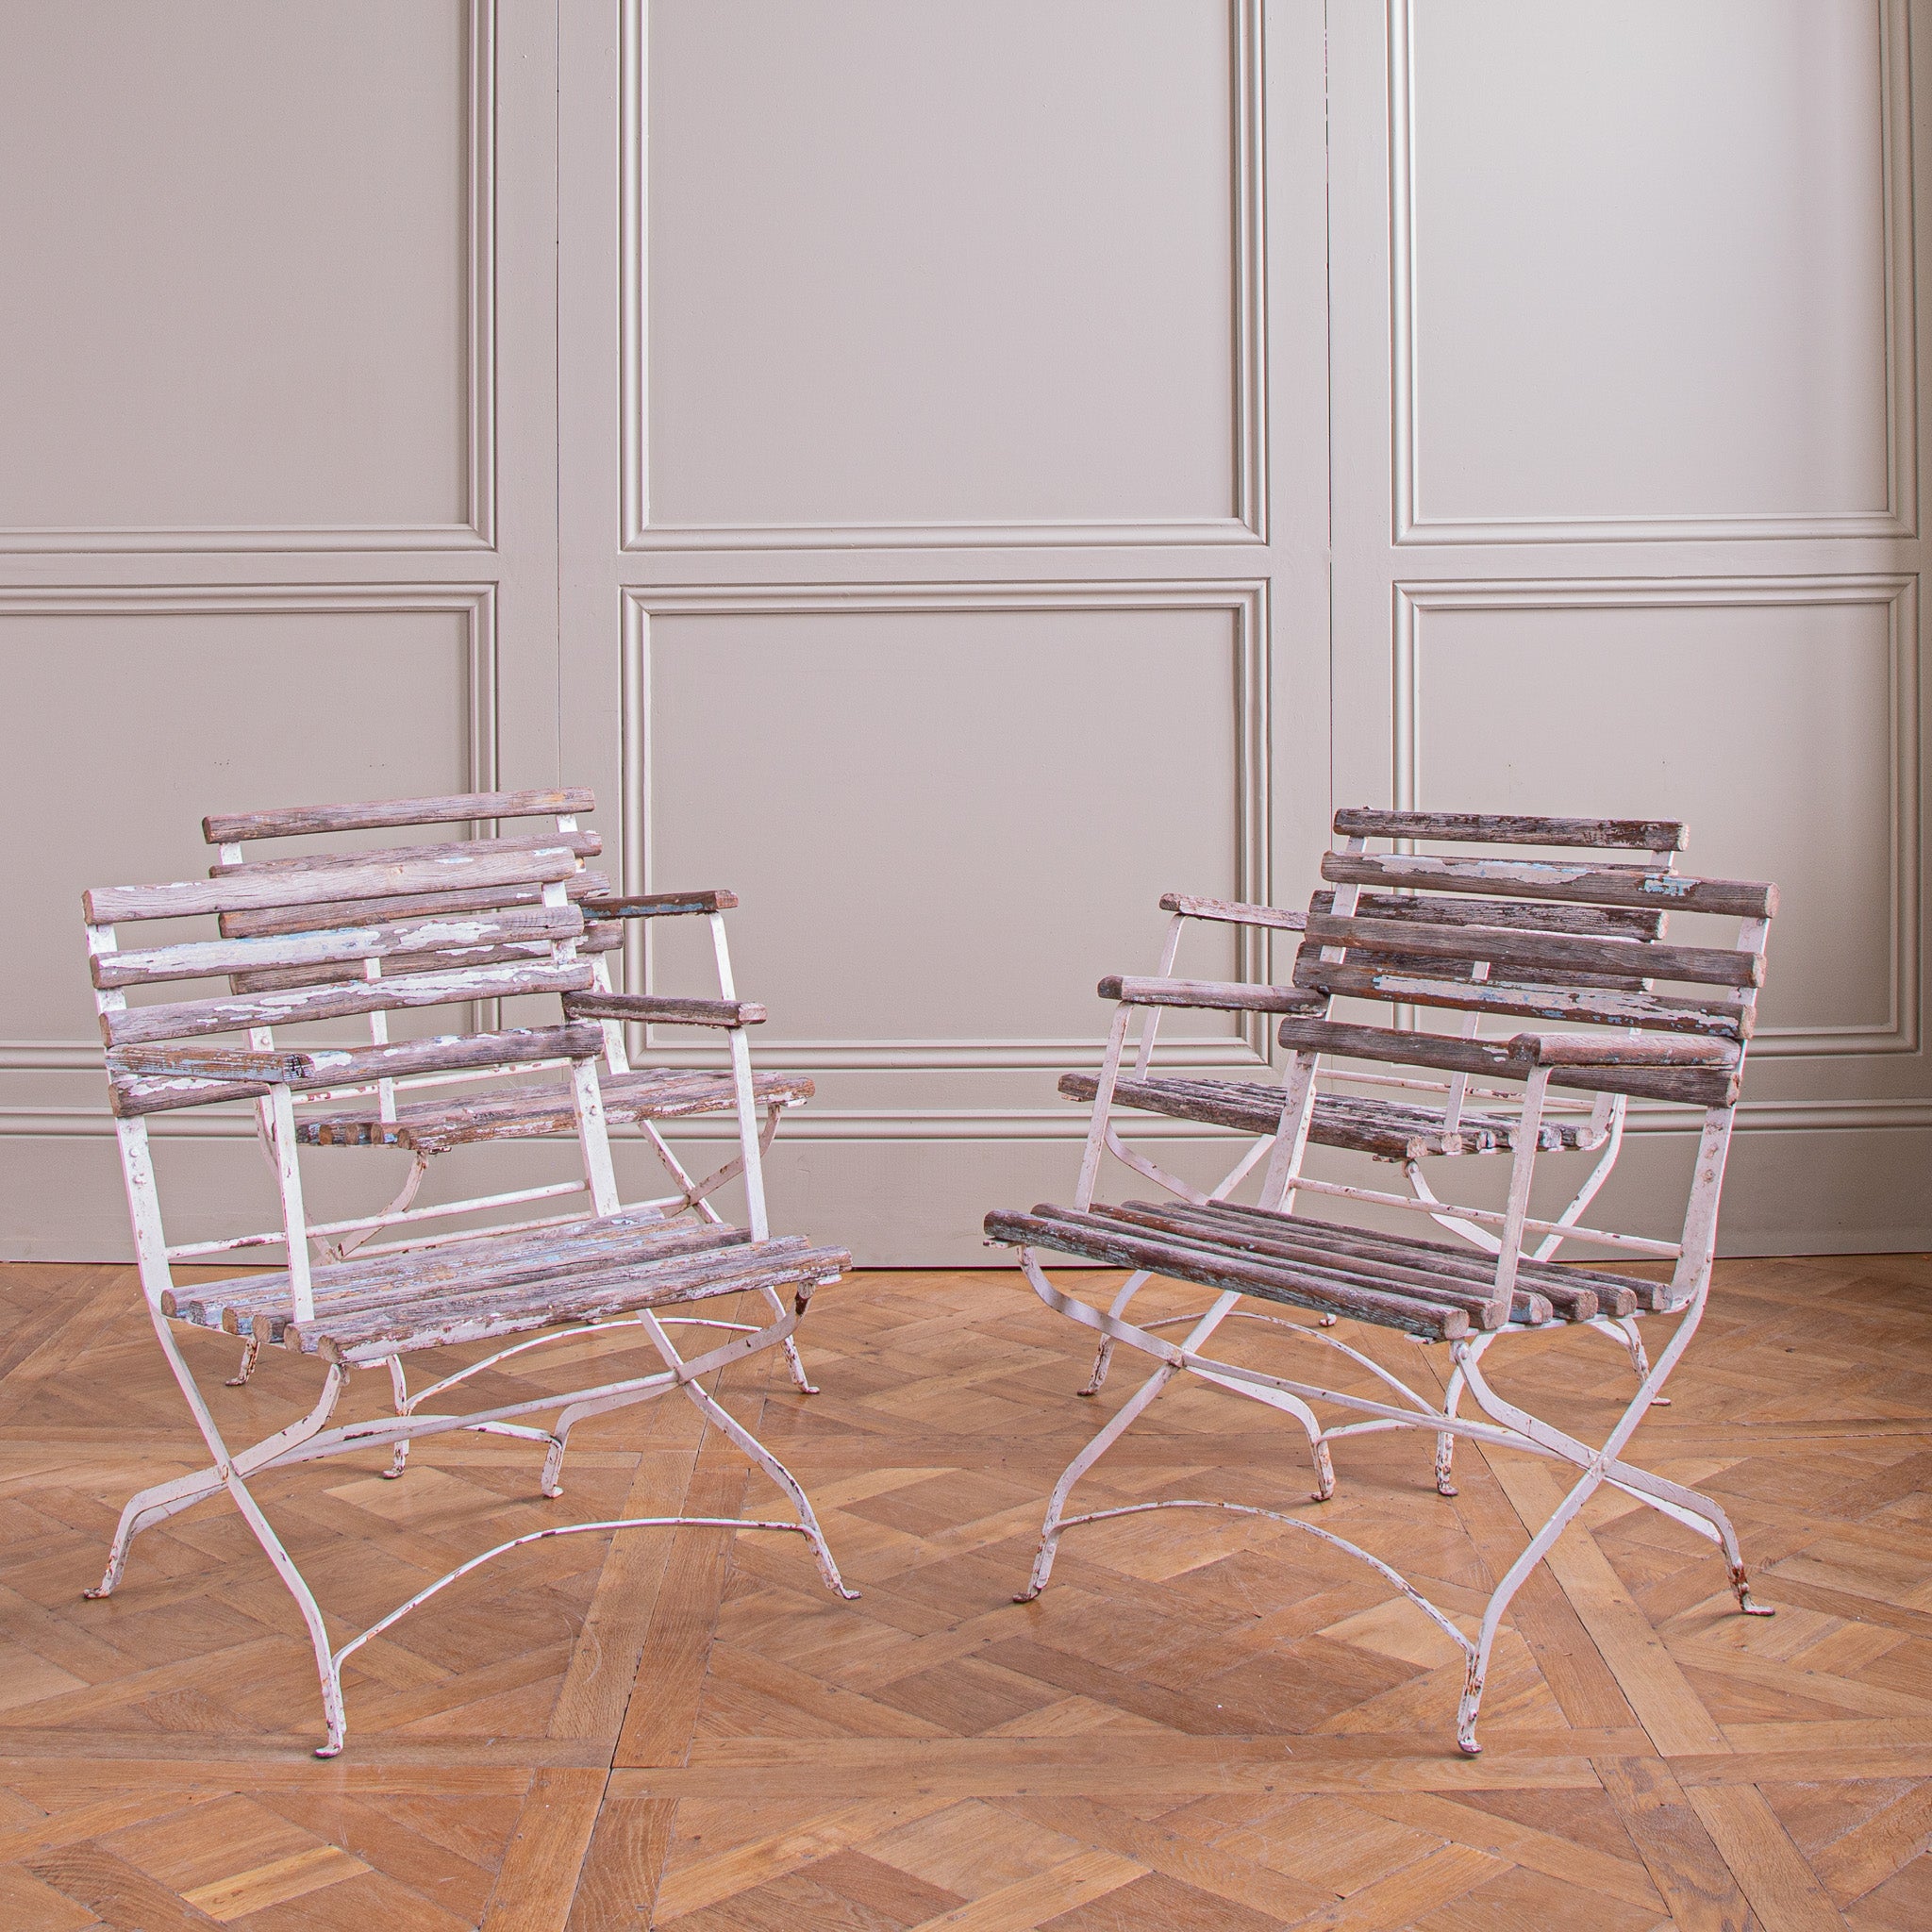 A  set of 4 slatted wood, garden armchairs from the South of France,. The chairs feature a generous seat size made with metal frames which have beech wood, cross slats . Once painted white and later blue, small amounts of both these colours can